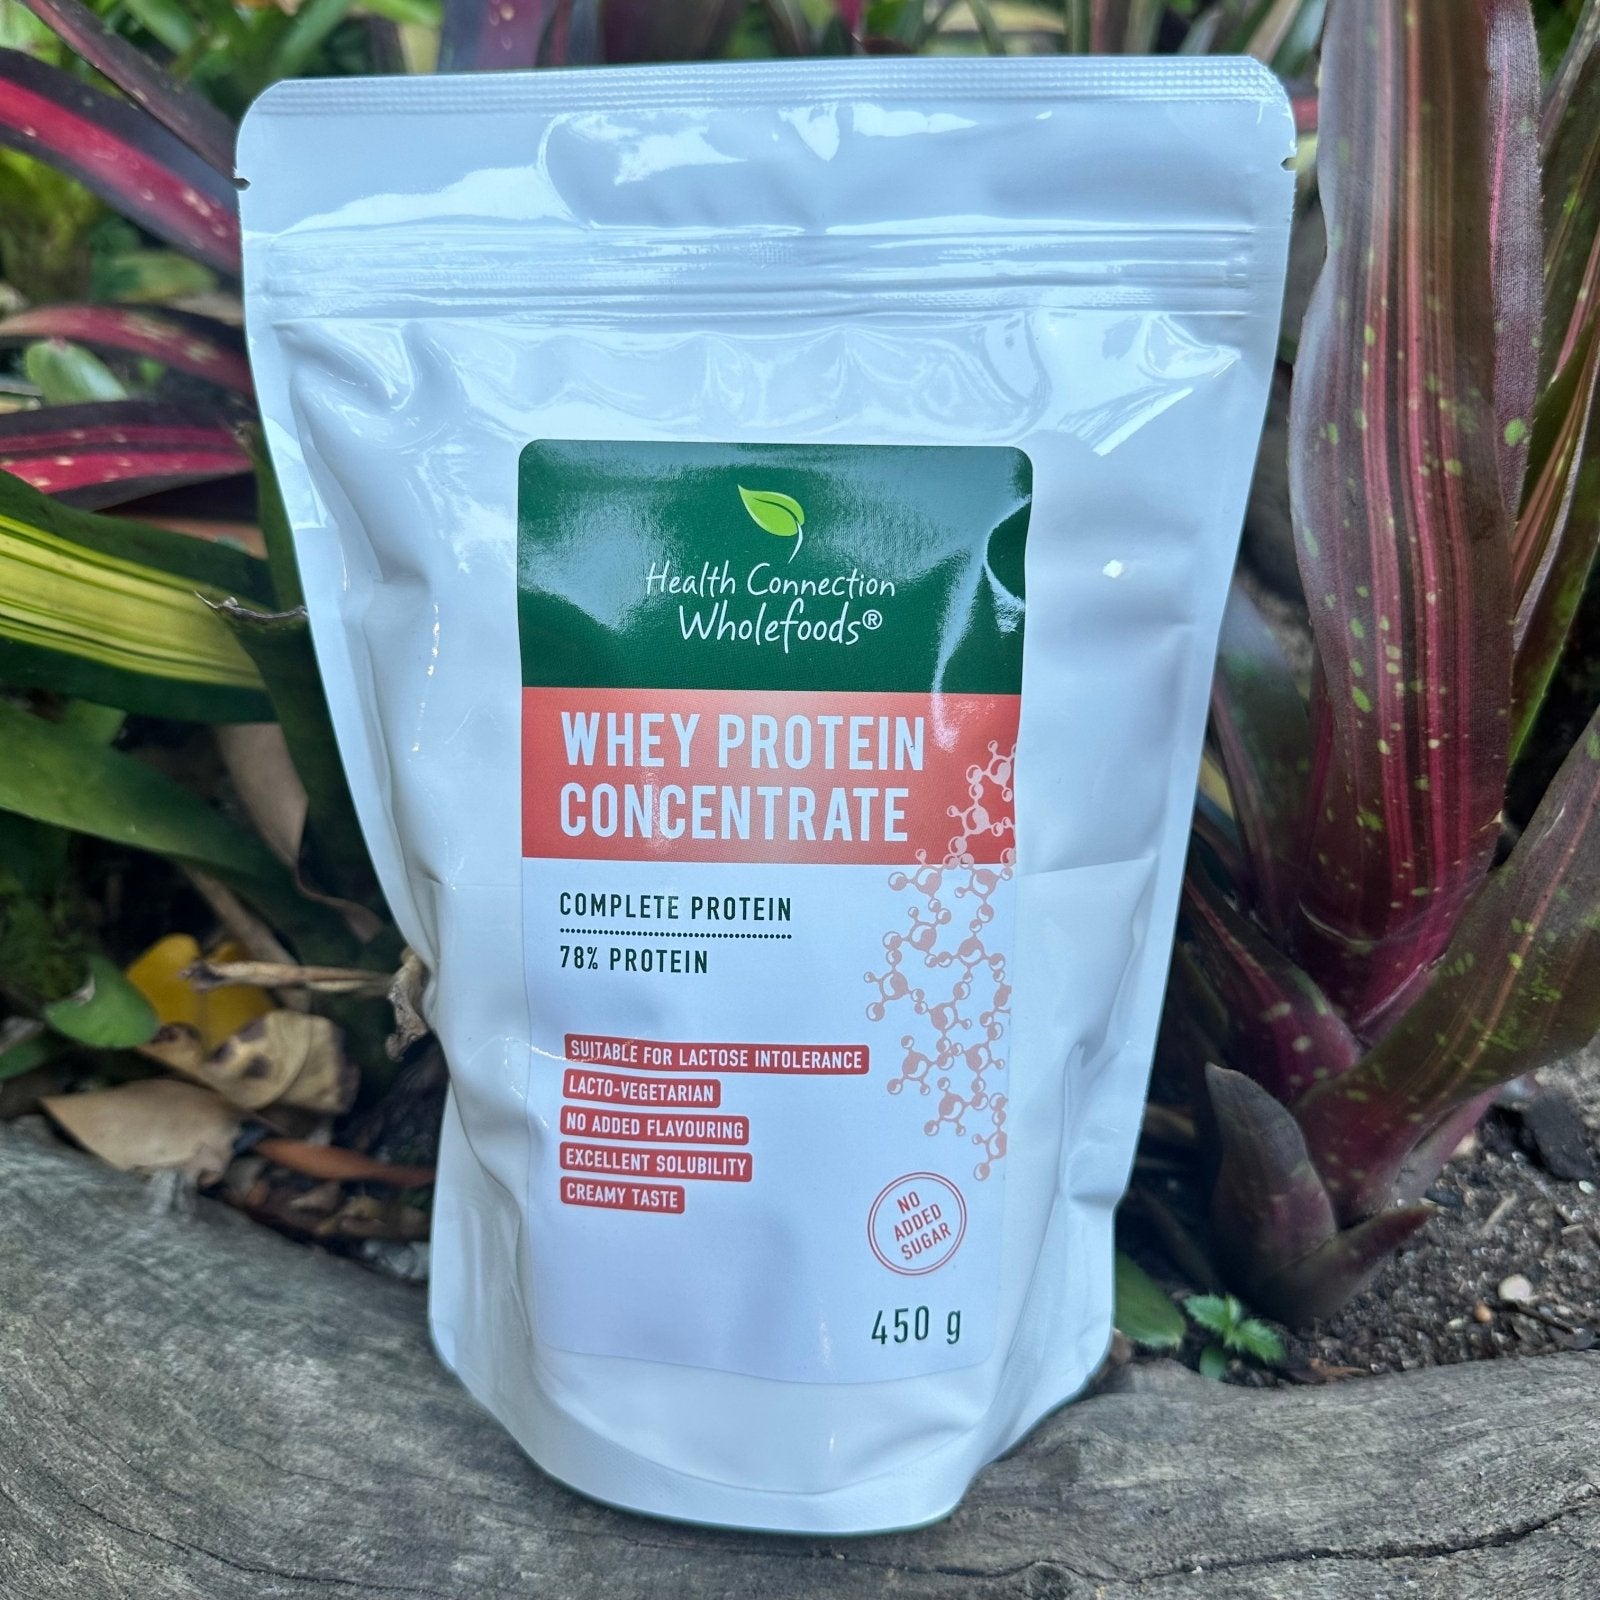 Whey Protein Concentrate (450g) - The Deli